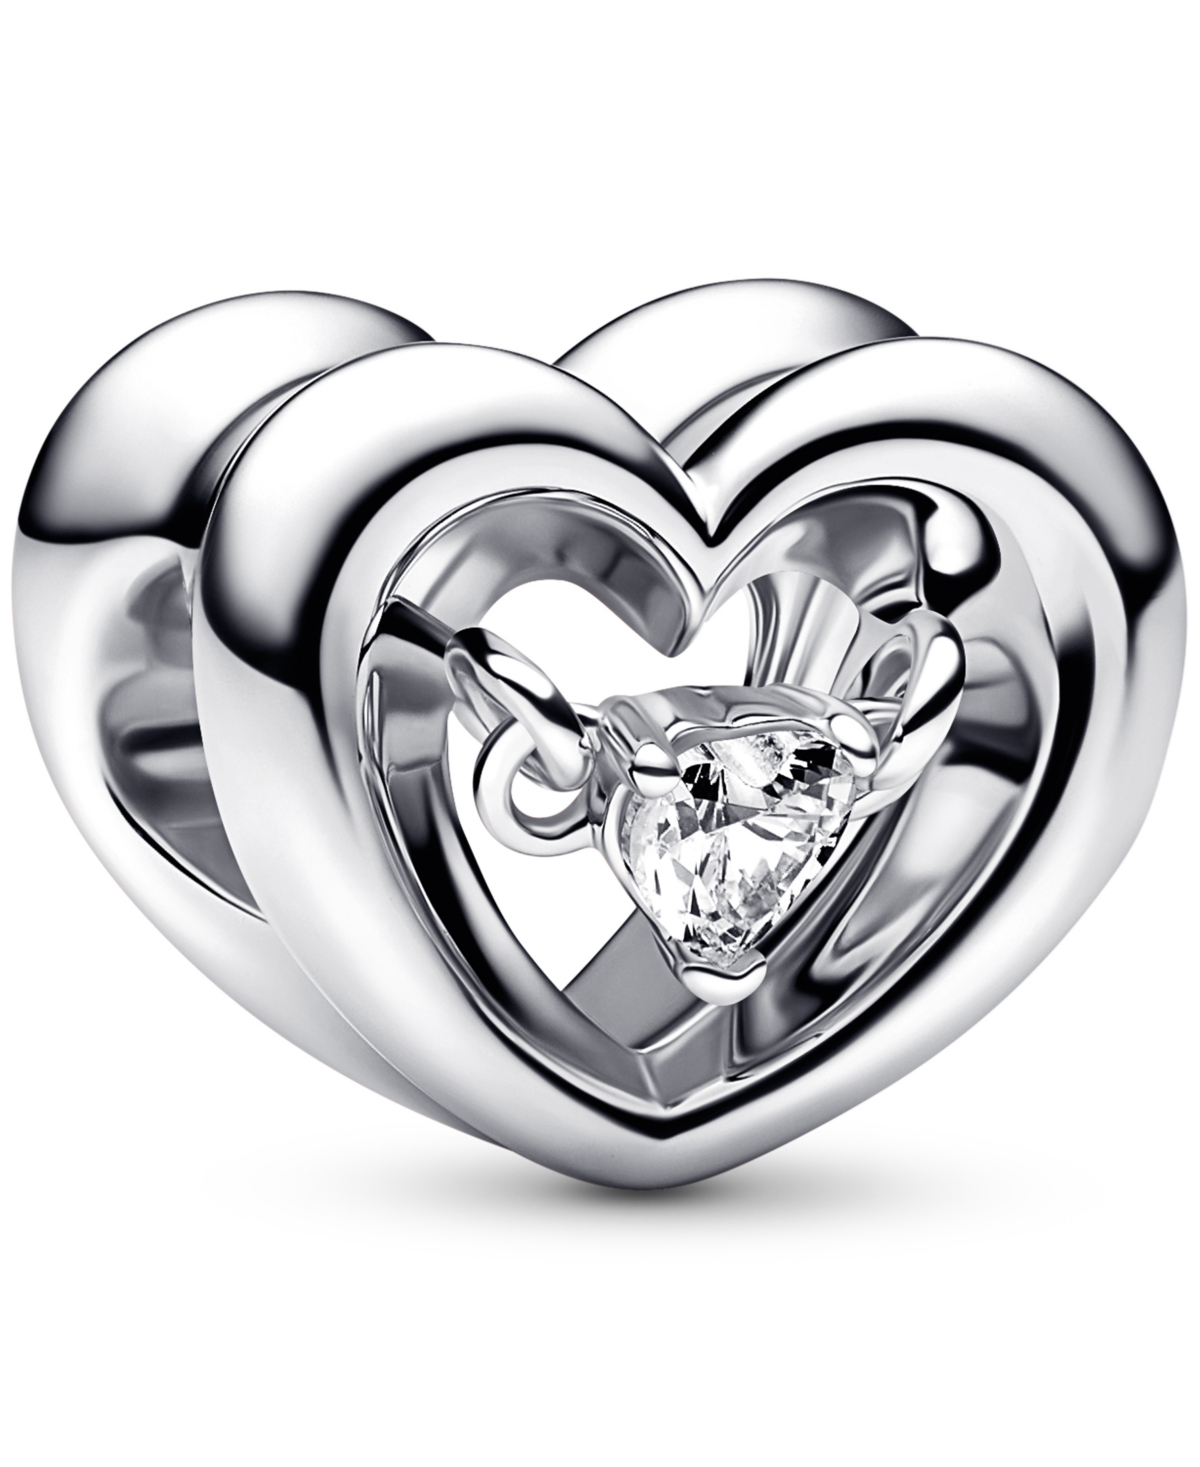 Cubic Zirconia Radiant Heart Floating Stone Charm - Silver